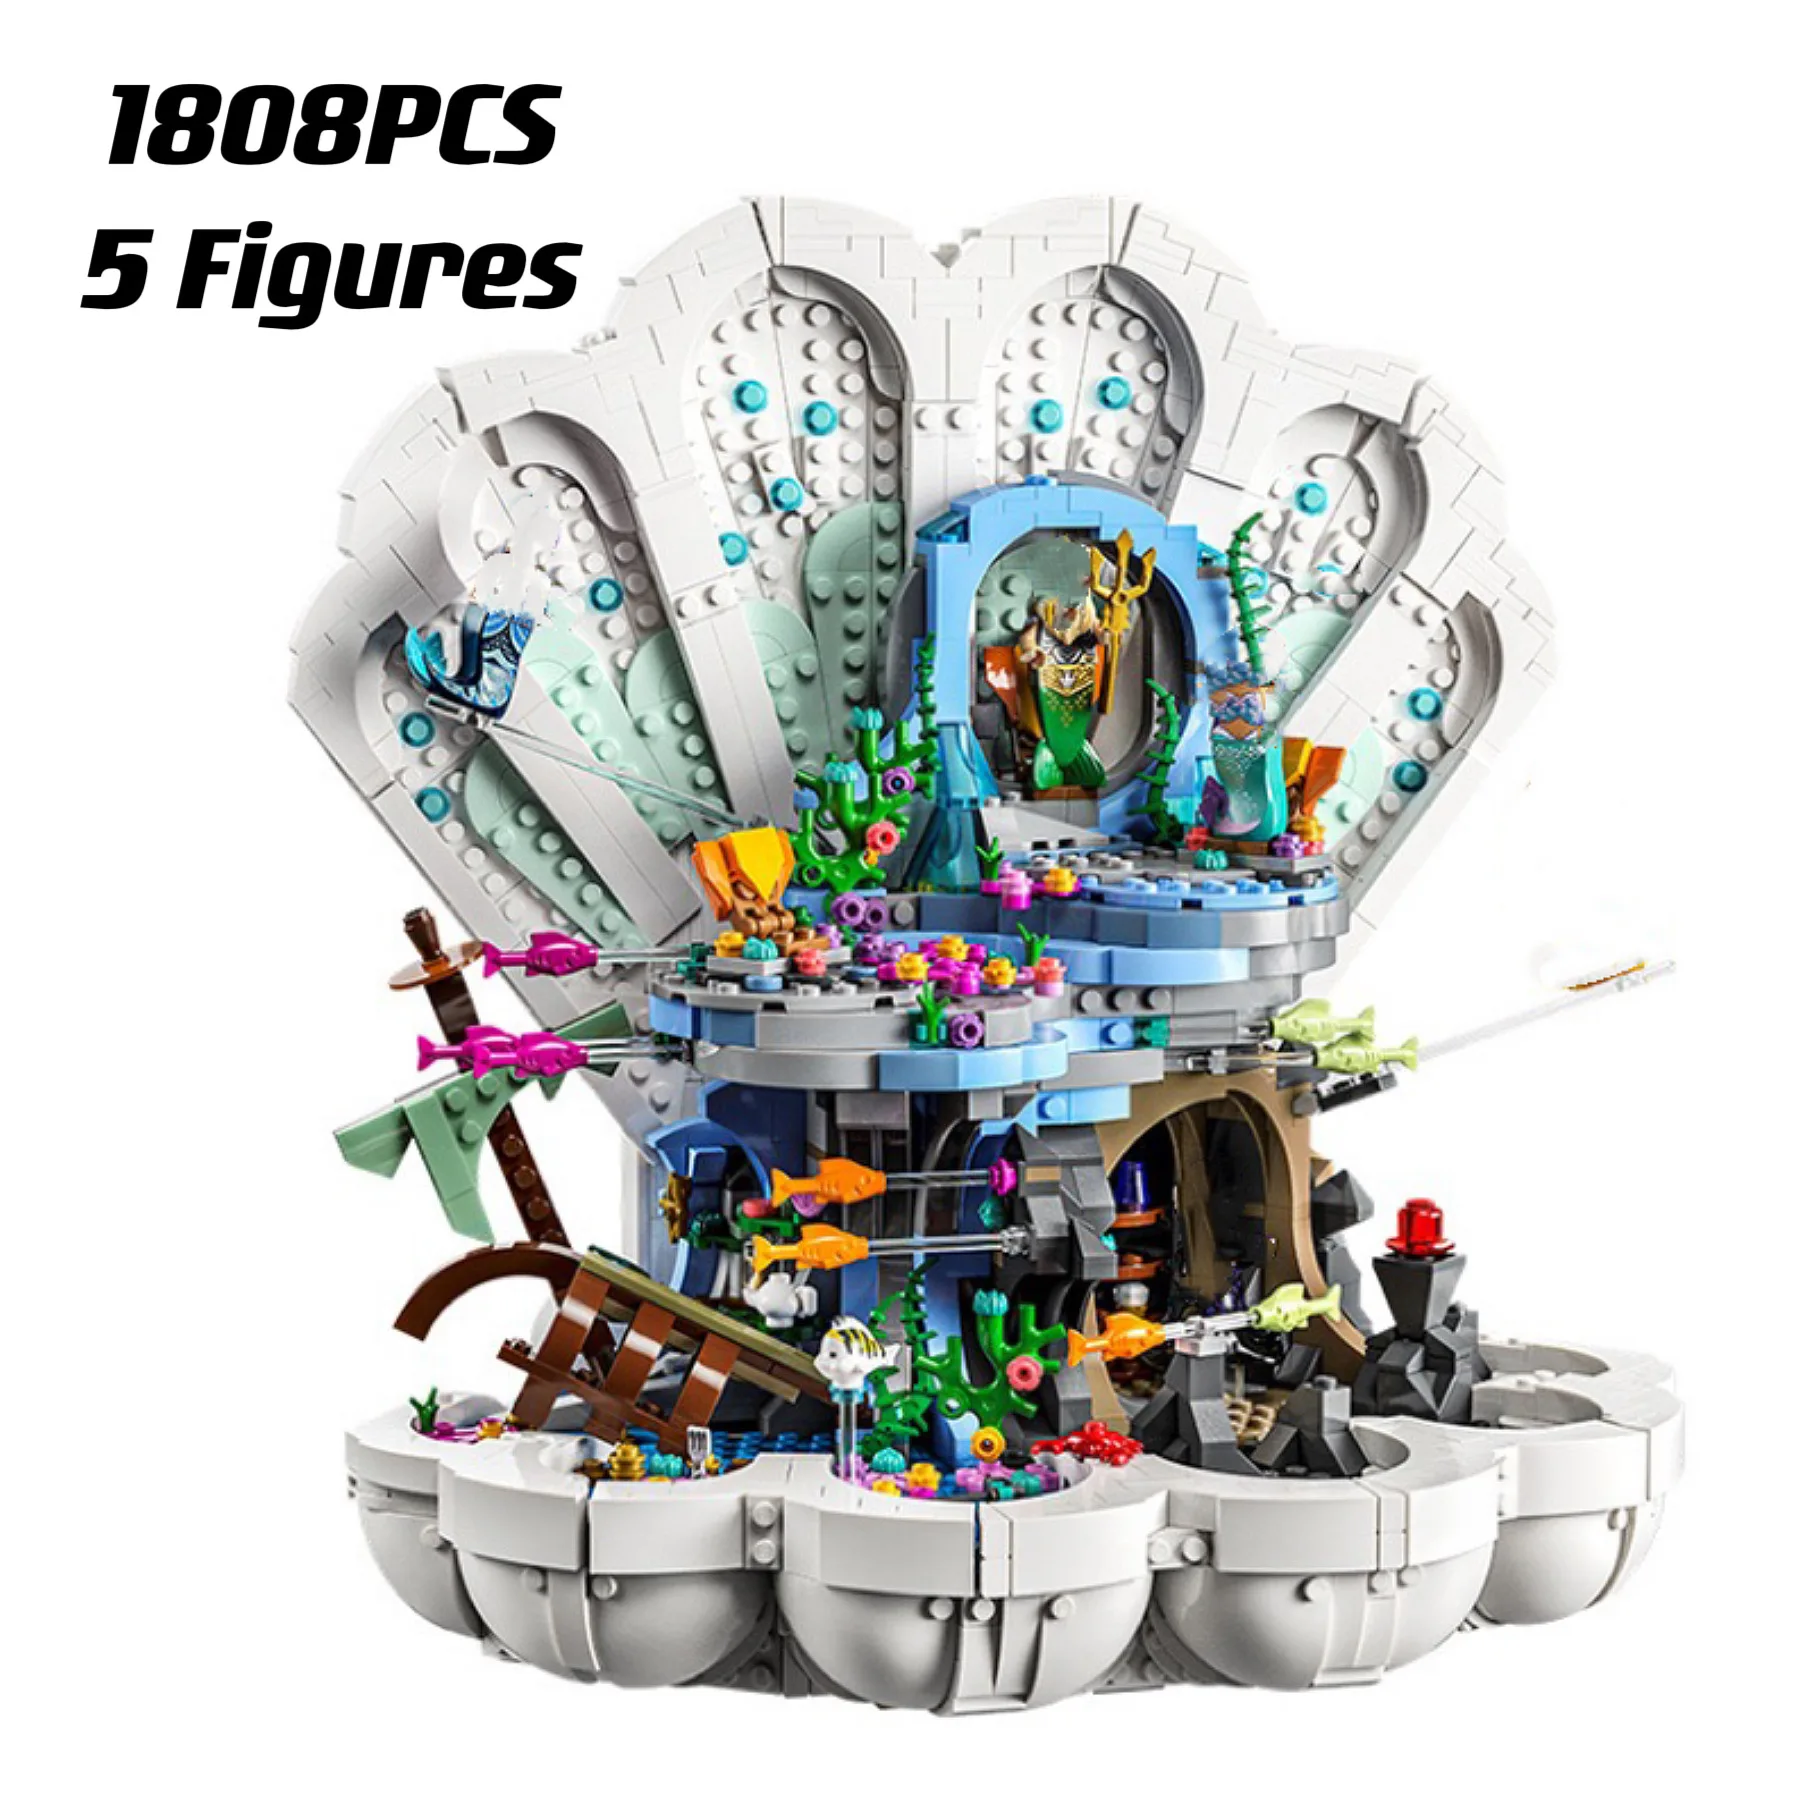 

1808pcs Mermaid Royal Clamshell Princess Underwater Palace Castle Building Blocks Girls Puzzle Toys Gift 43225 Technical